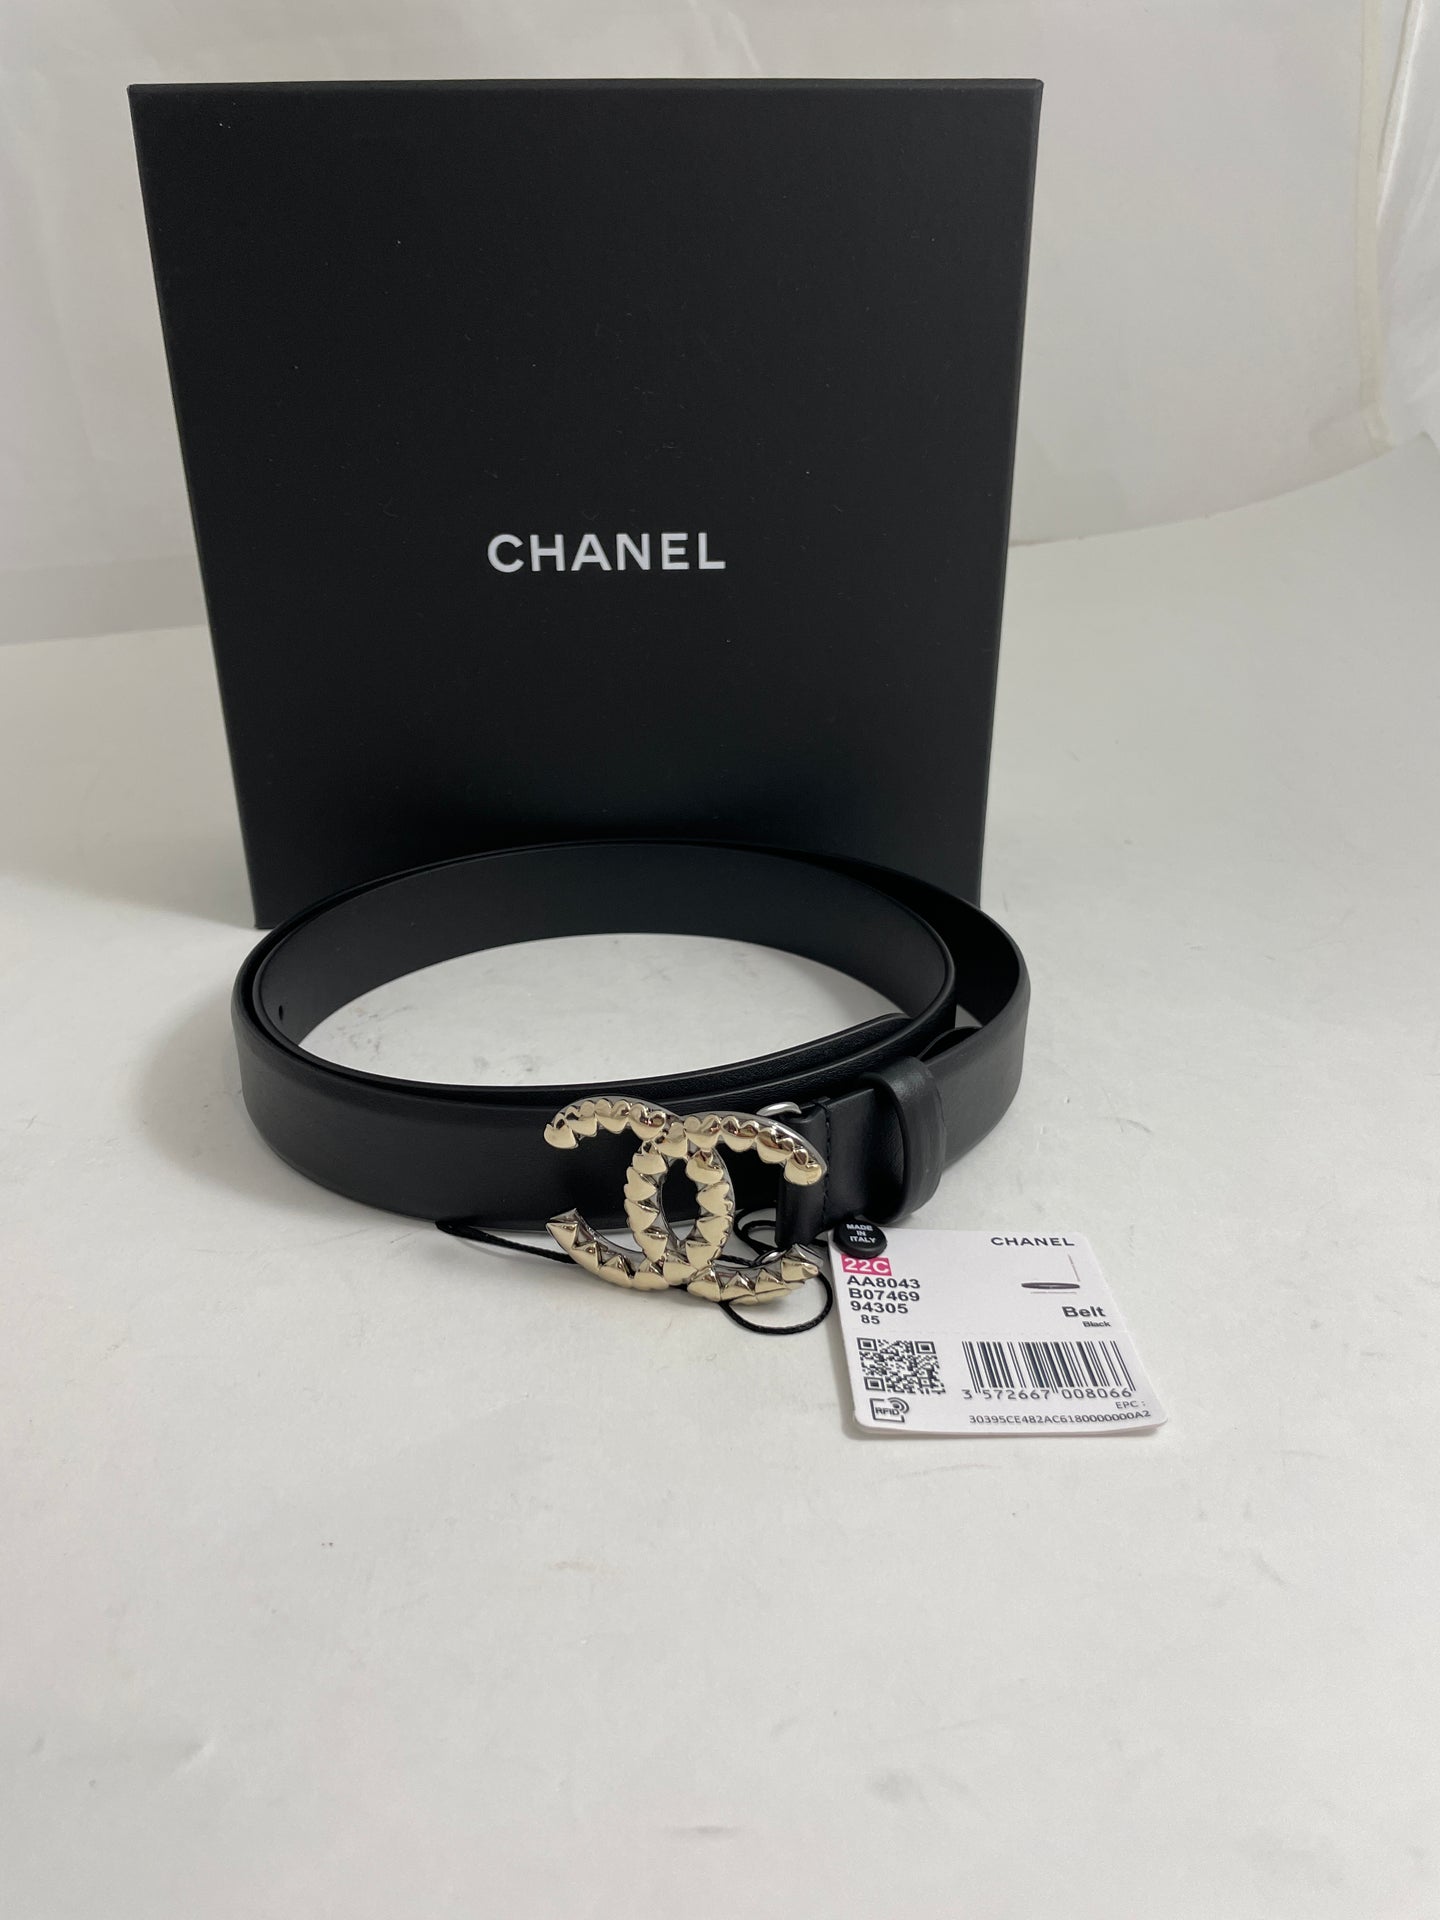 Chanel Black Leather Belt With Gold/Silver/Ruthenium Buckle